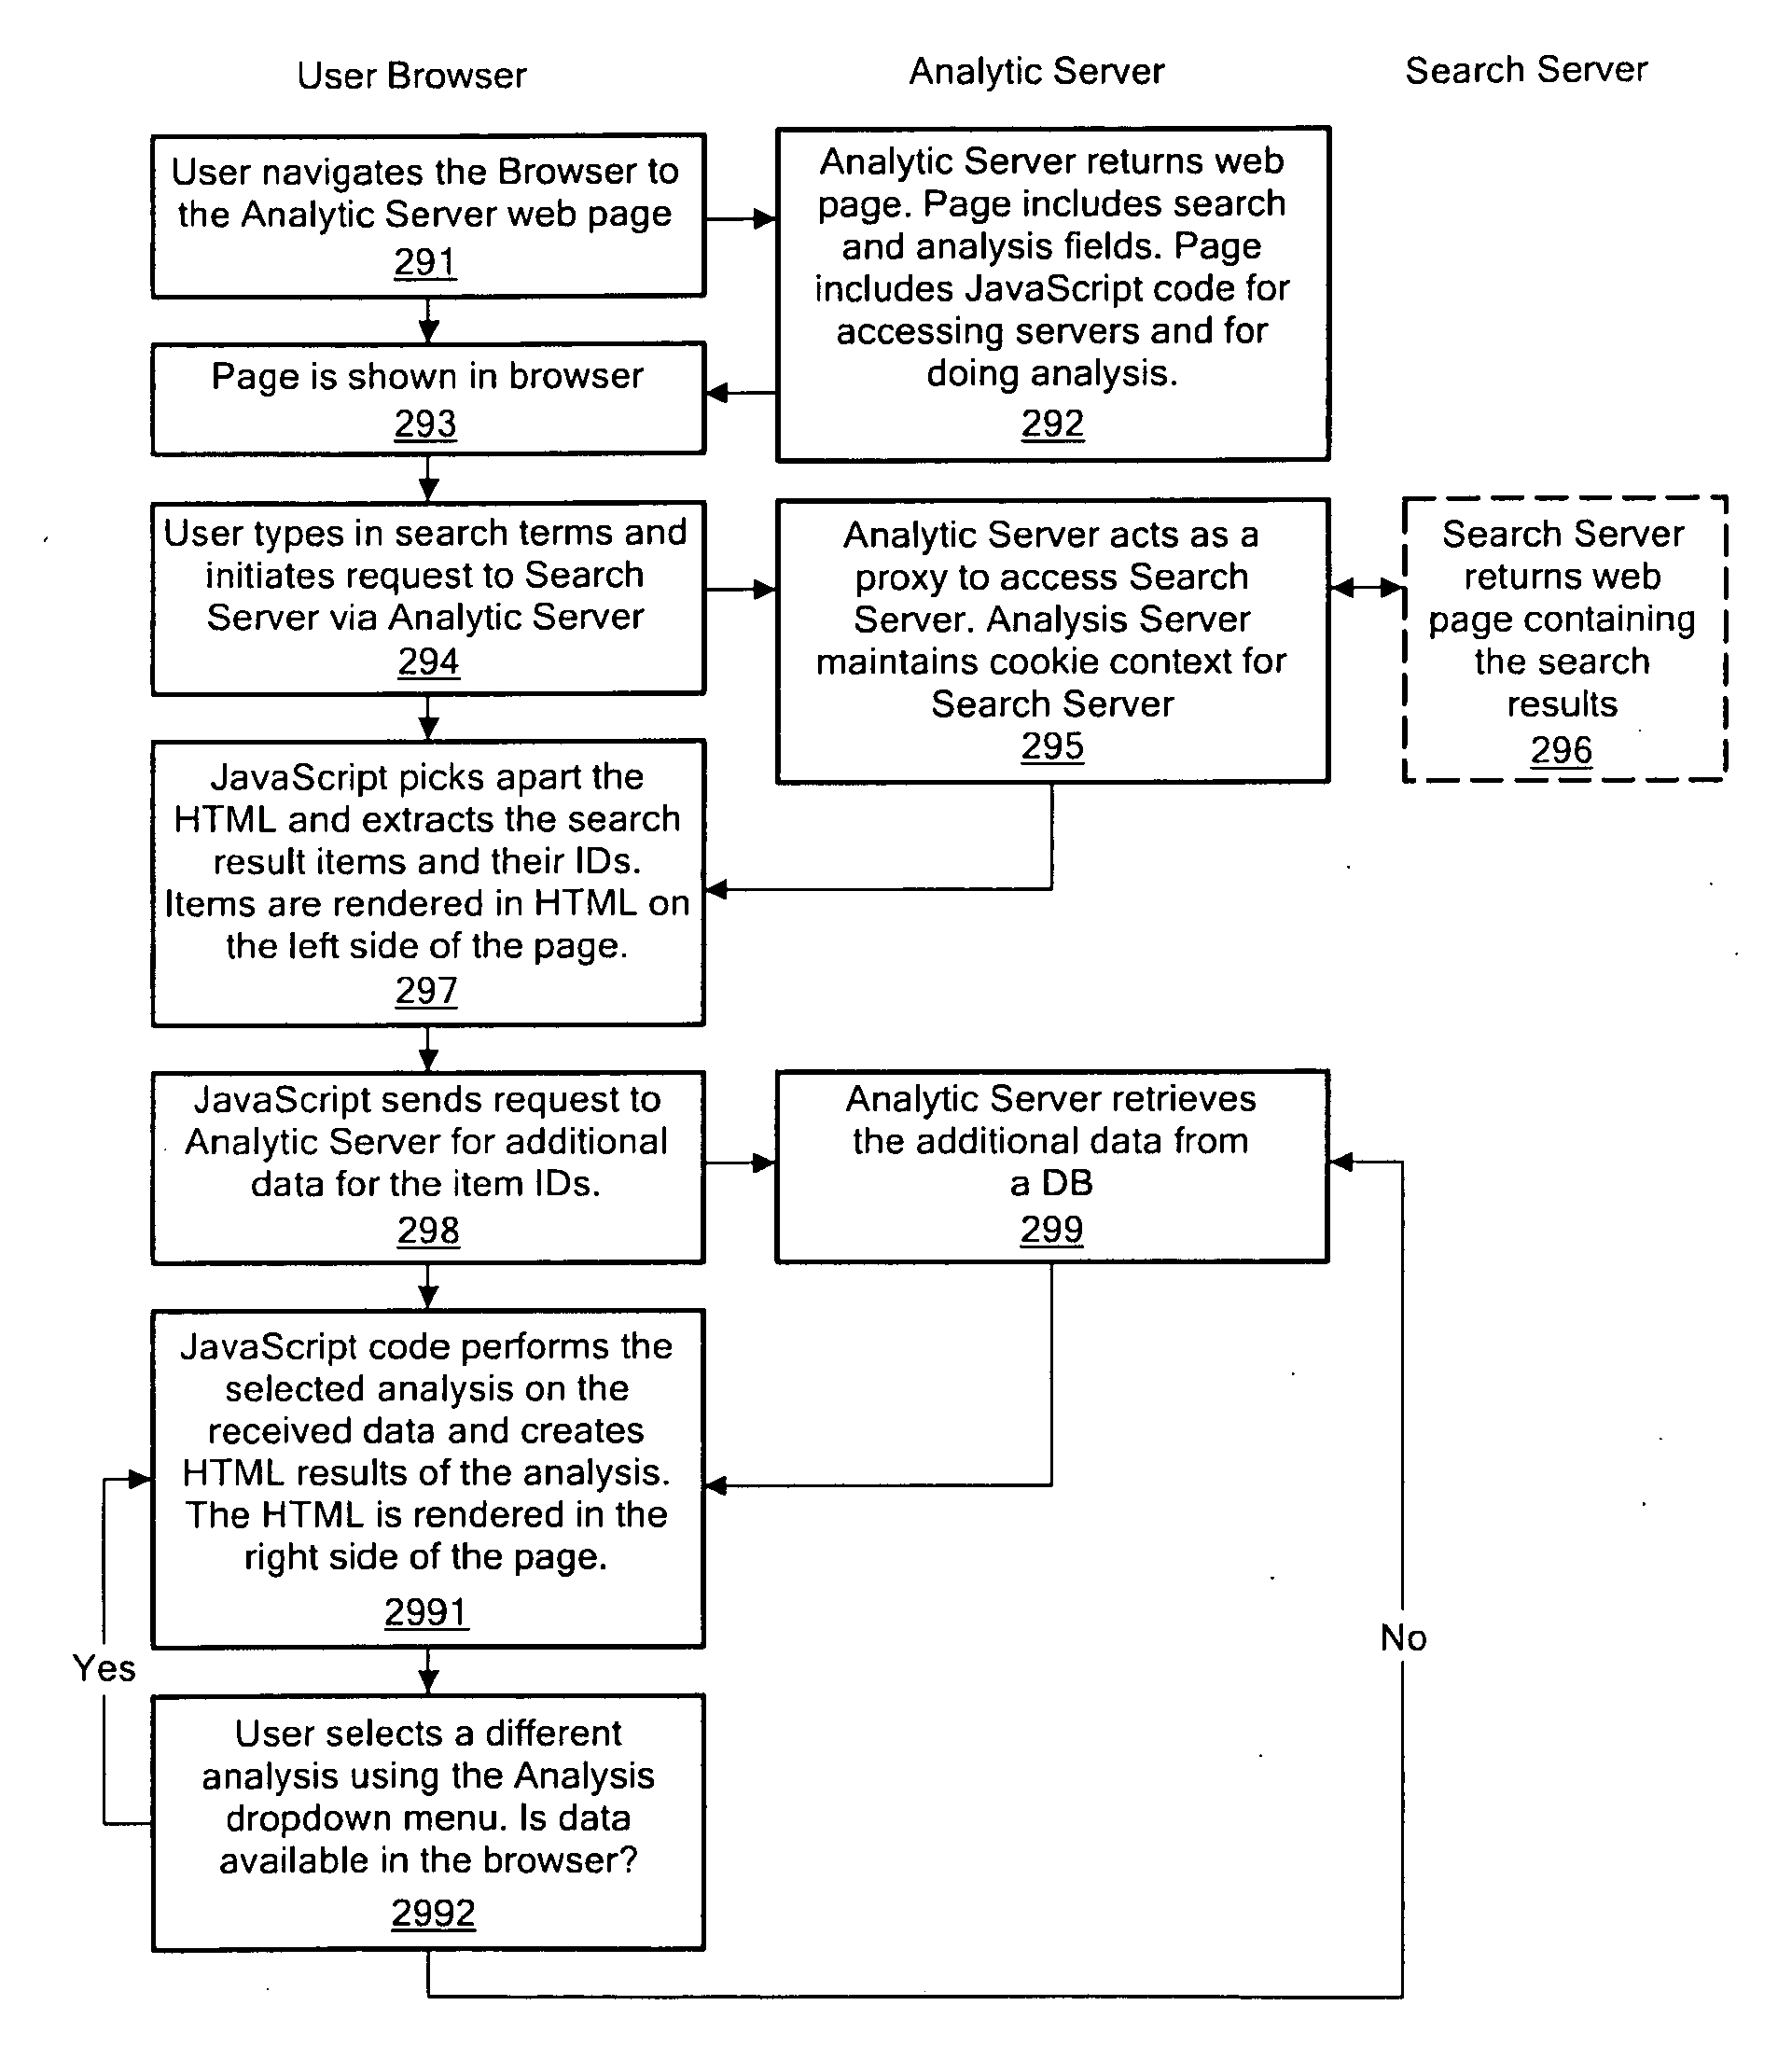 Apparatus and Method for Performing Analyses on Data Derived from a Web-Based Search Engine